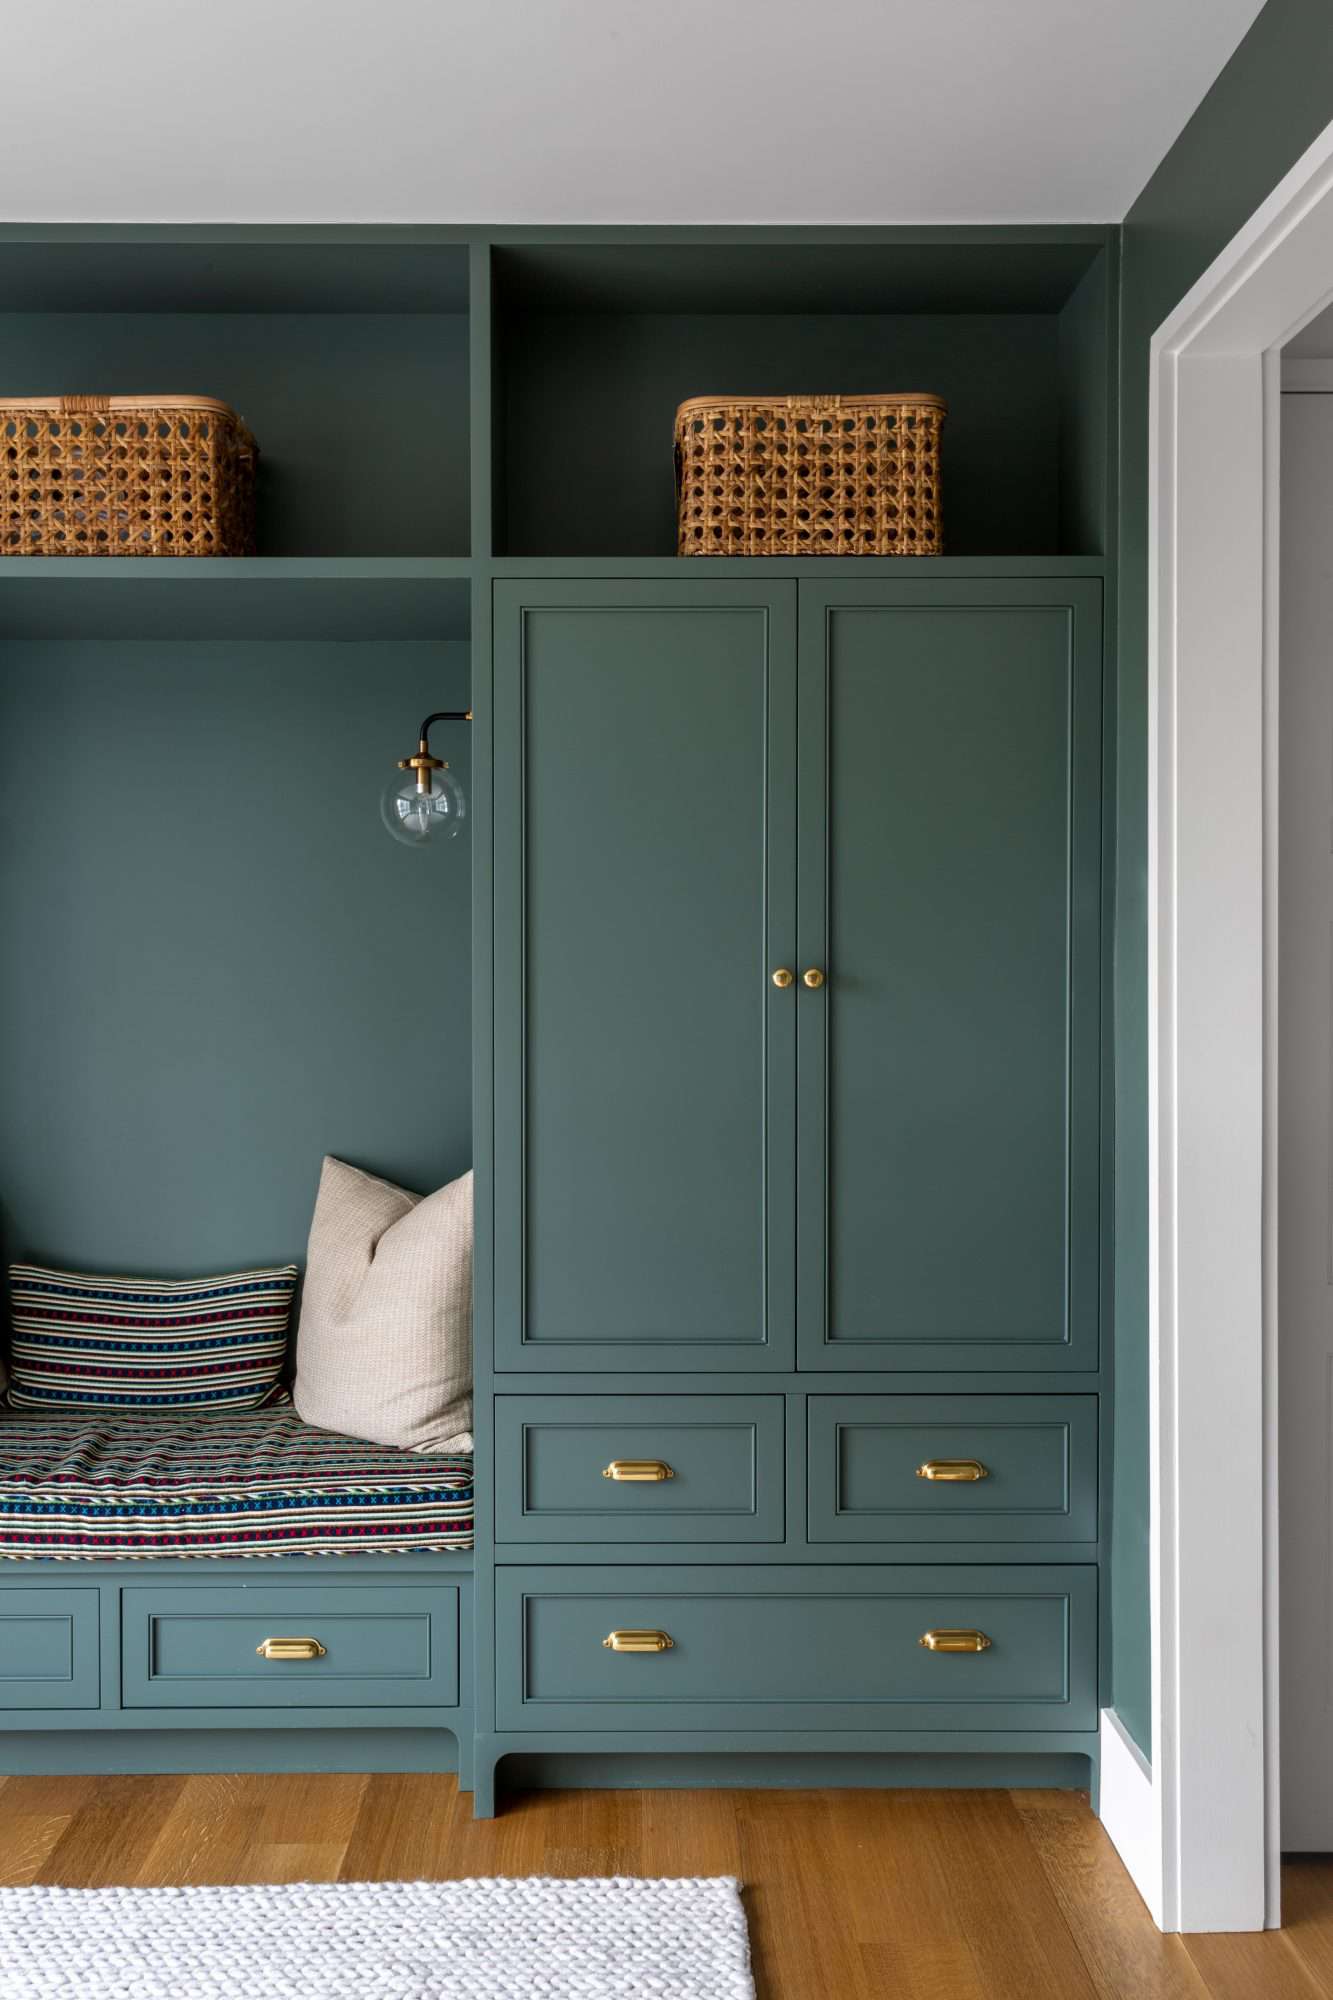 cabinets and sitting area, painted dark green